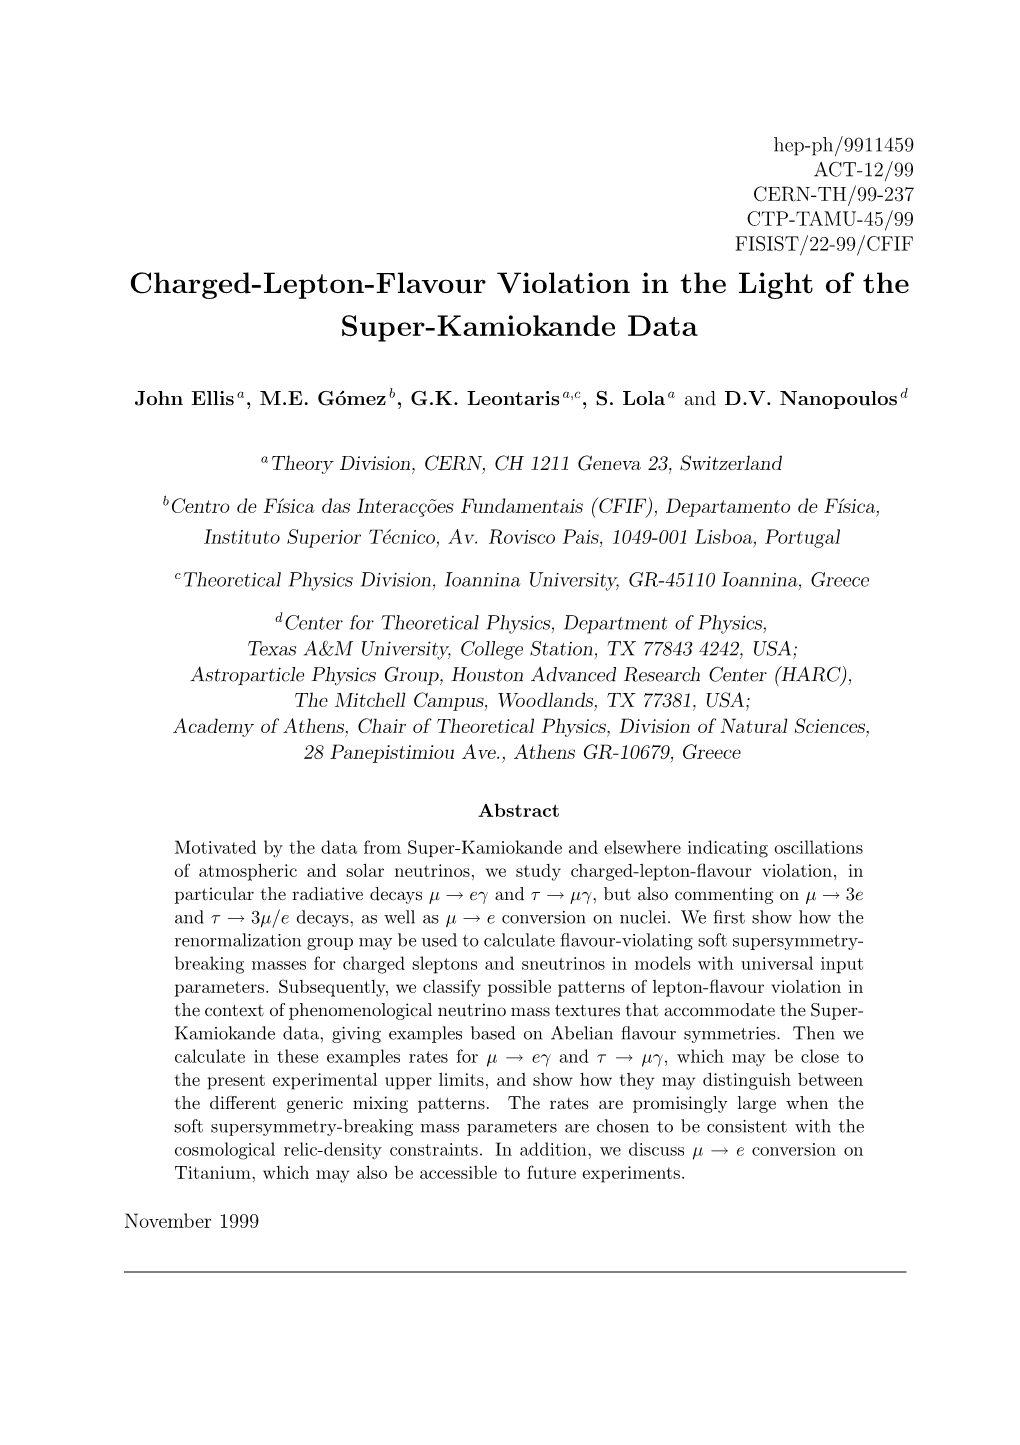 Charged-Lepton-Flavour Violation in the Light of the Super-Kamiokande Data